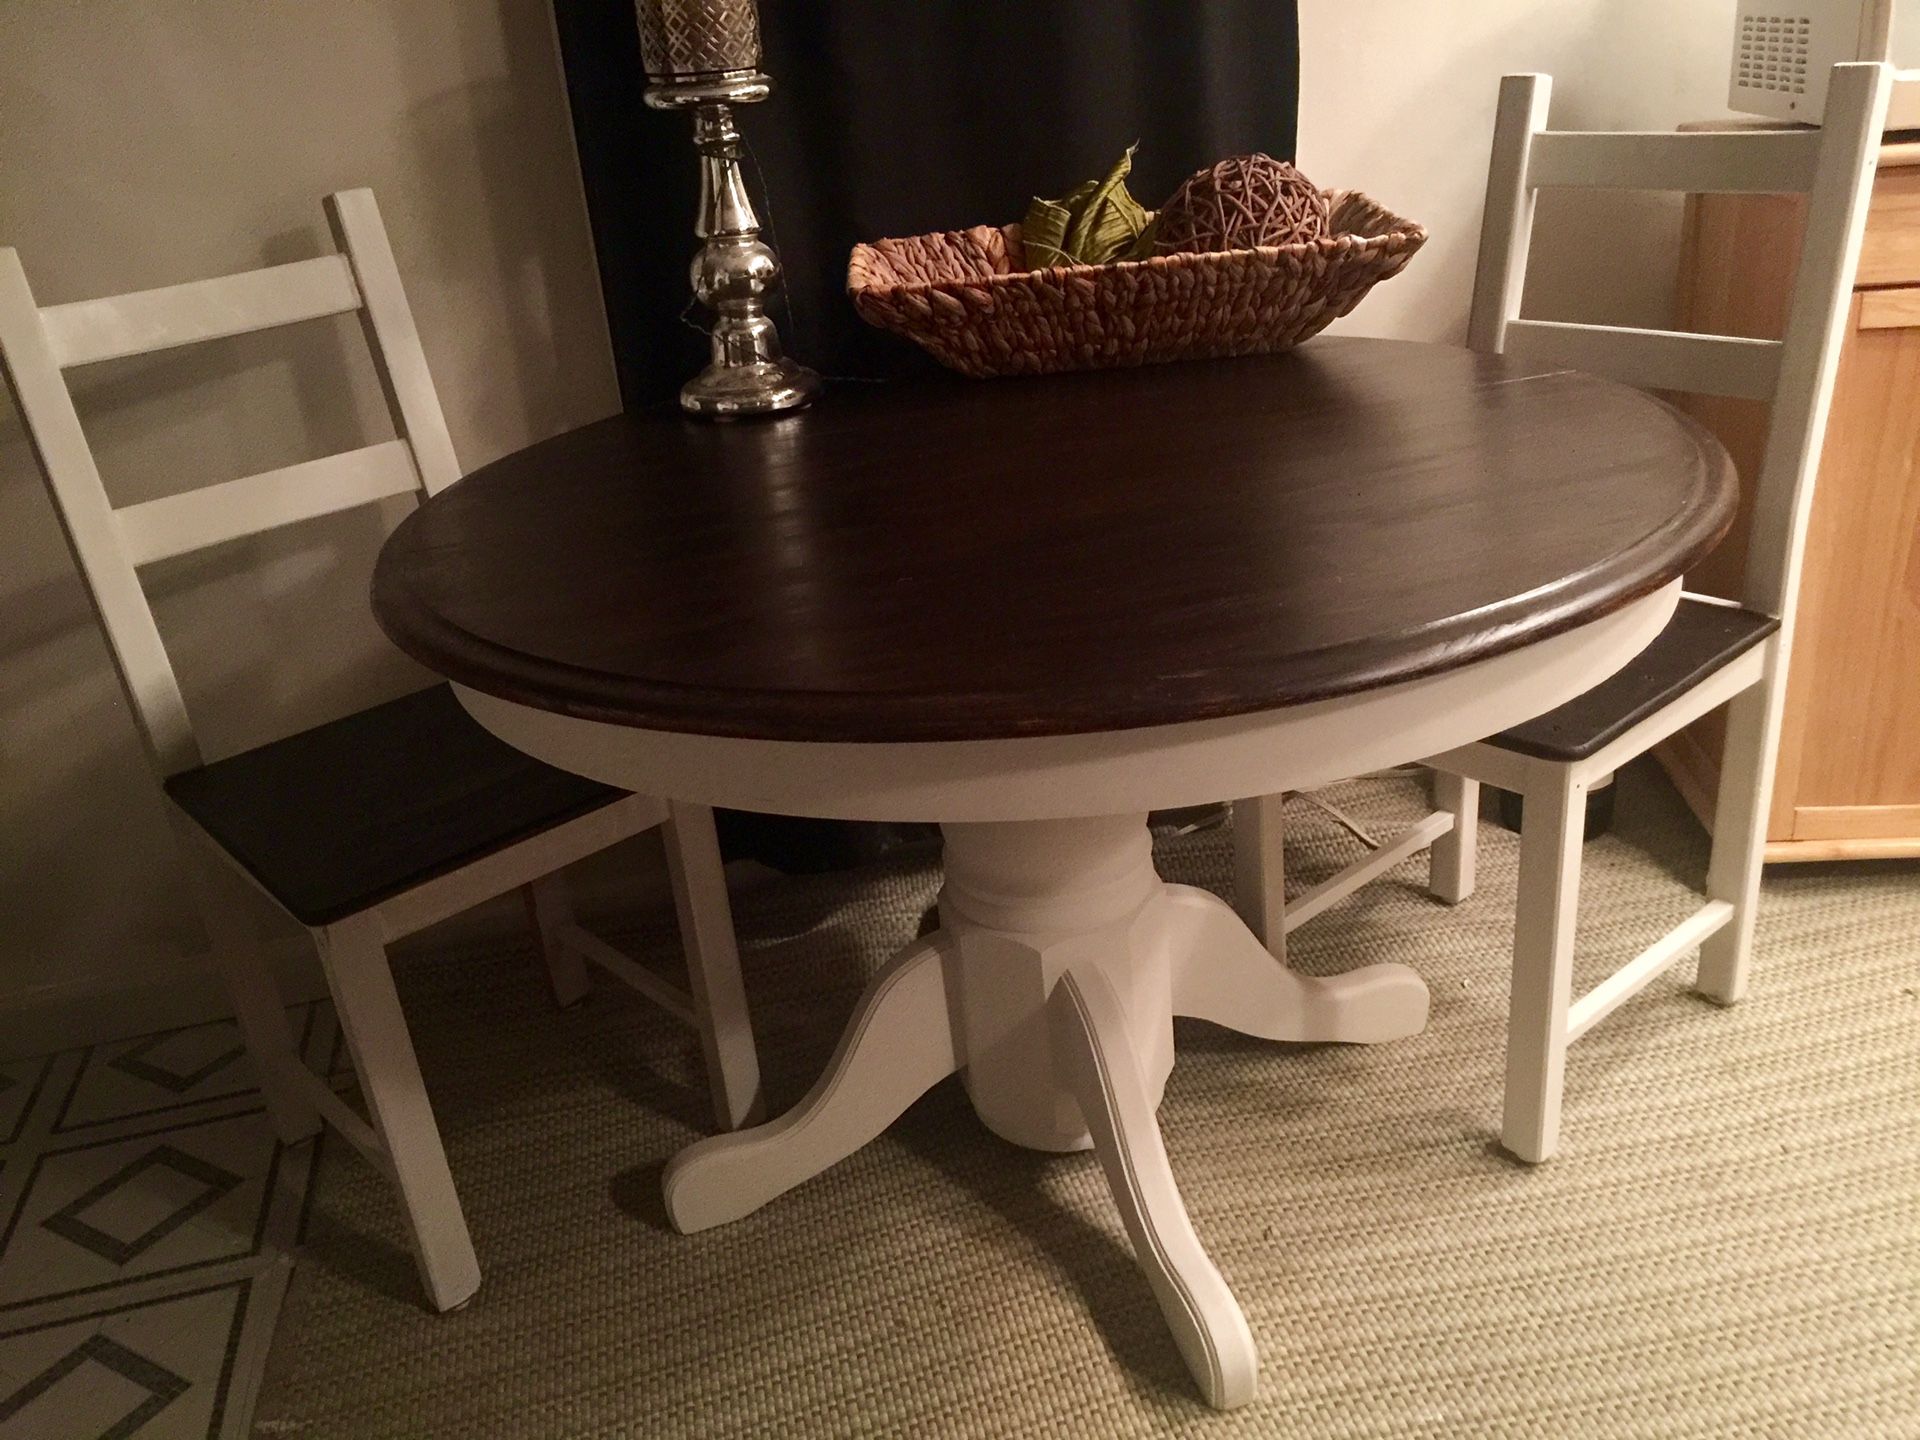 42” round solid wood dining/kitchen table w/leaf and 2 chairs!